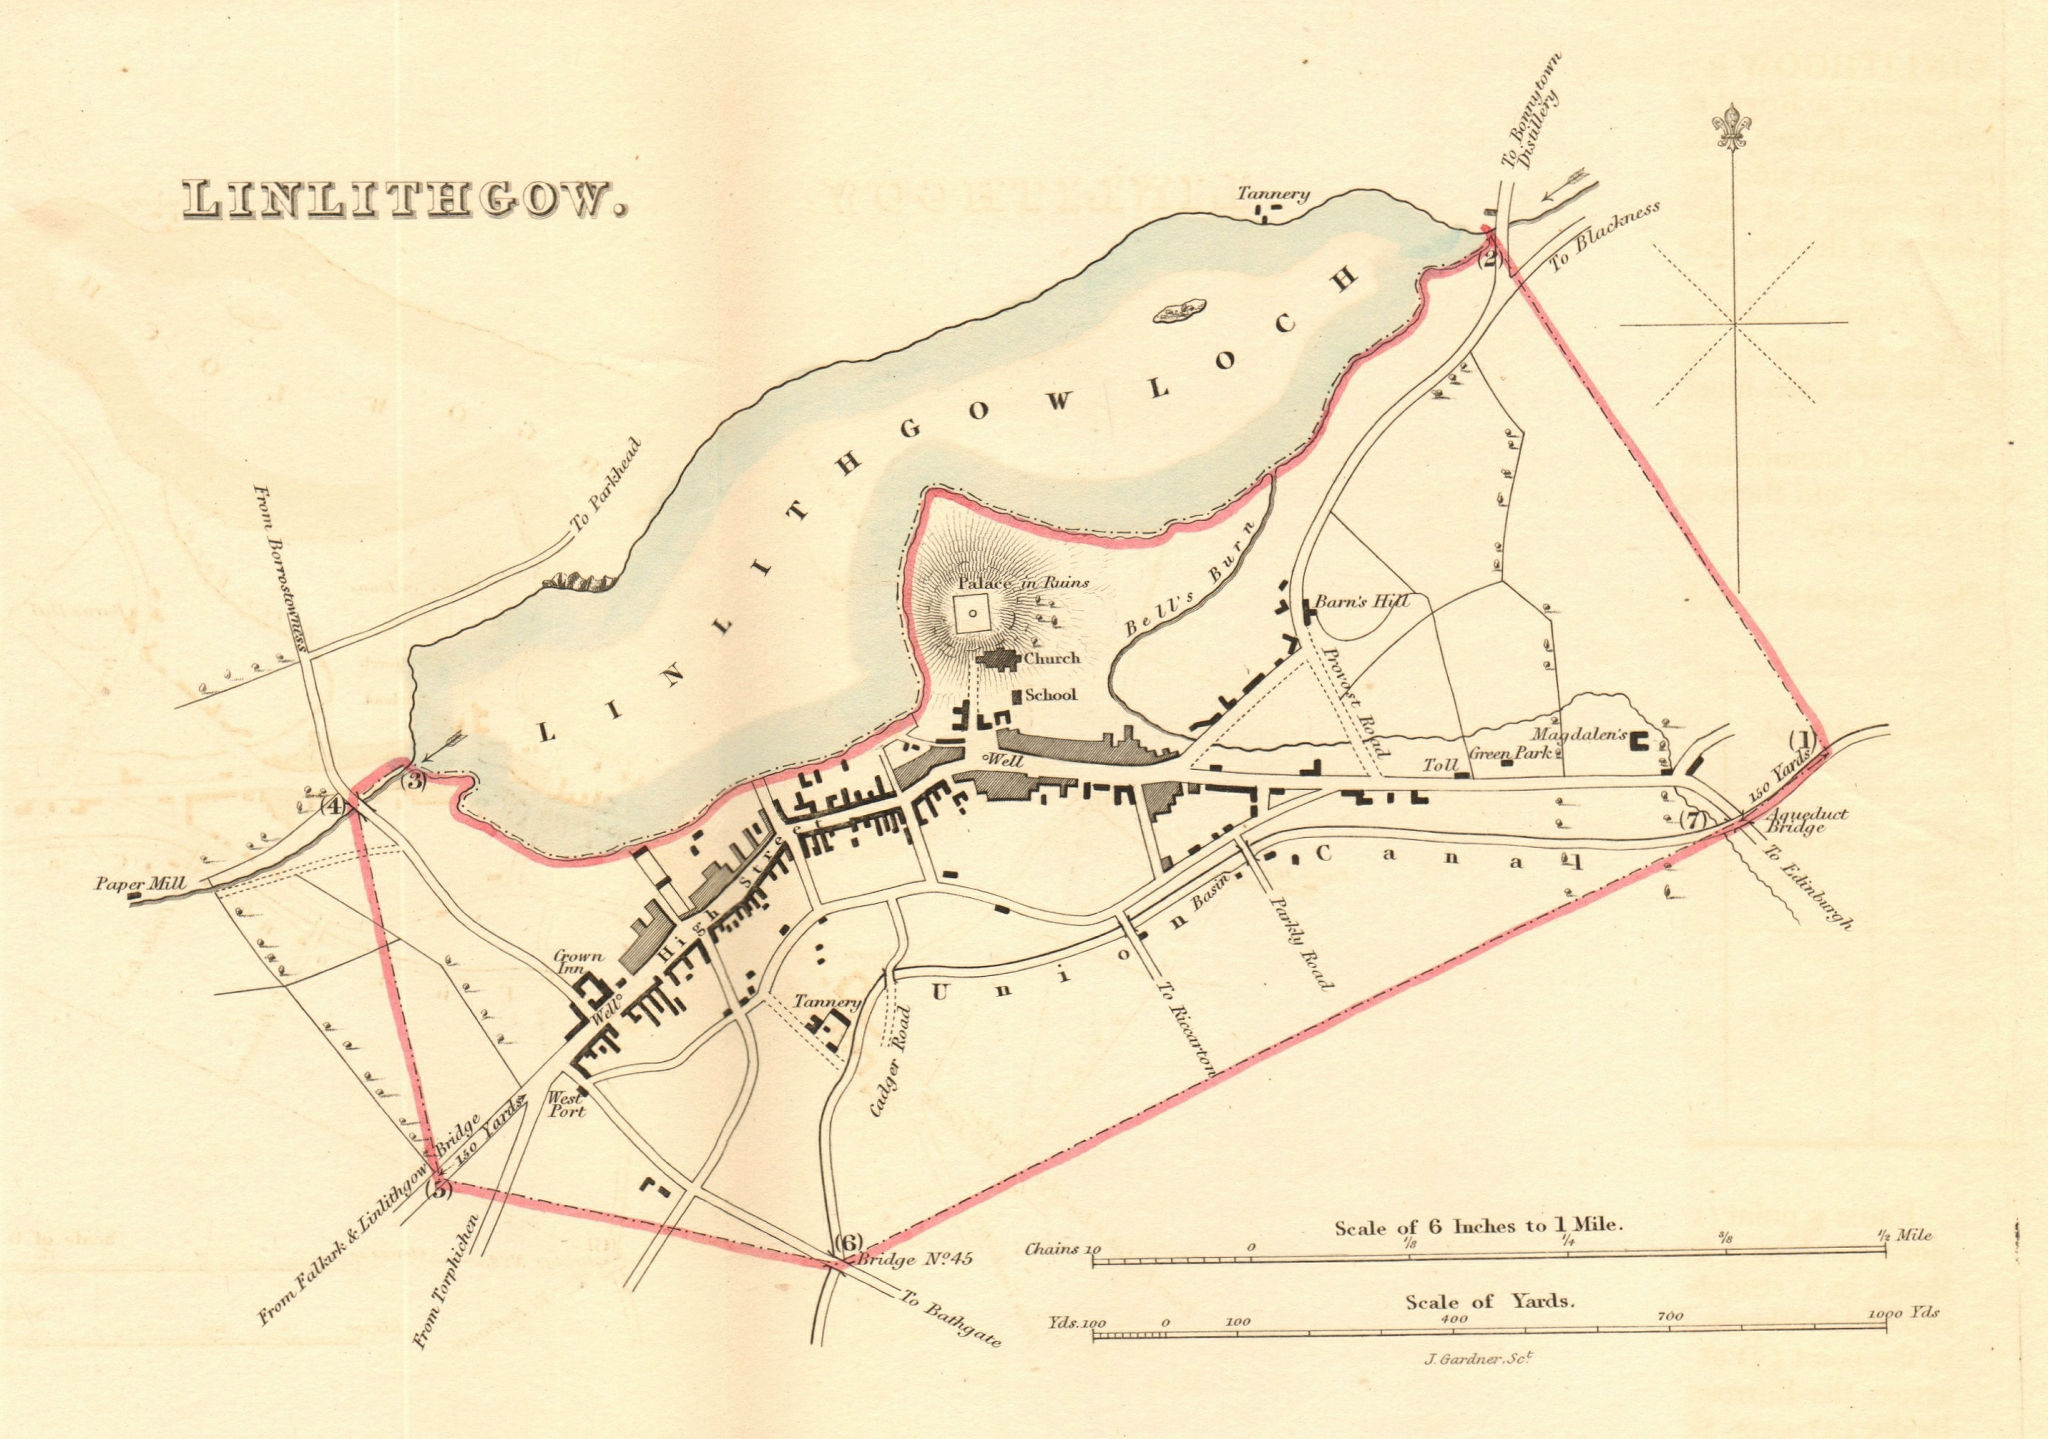 Associate Product LINLITHGOW borough/town plan for the REFORM ACT. Scotland 1832 old antique map